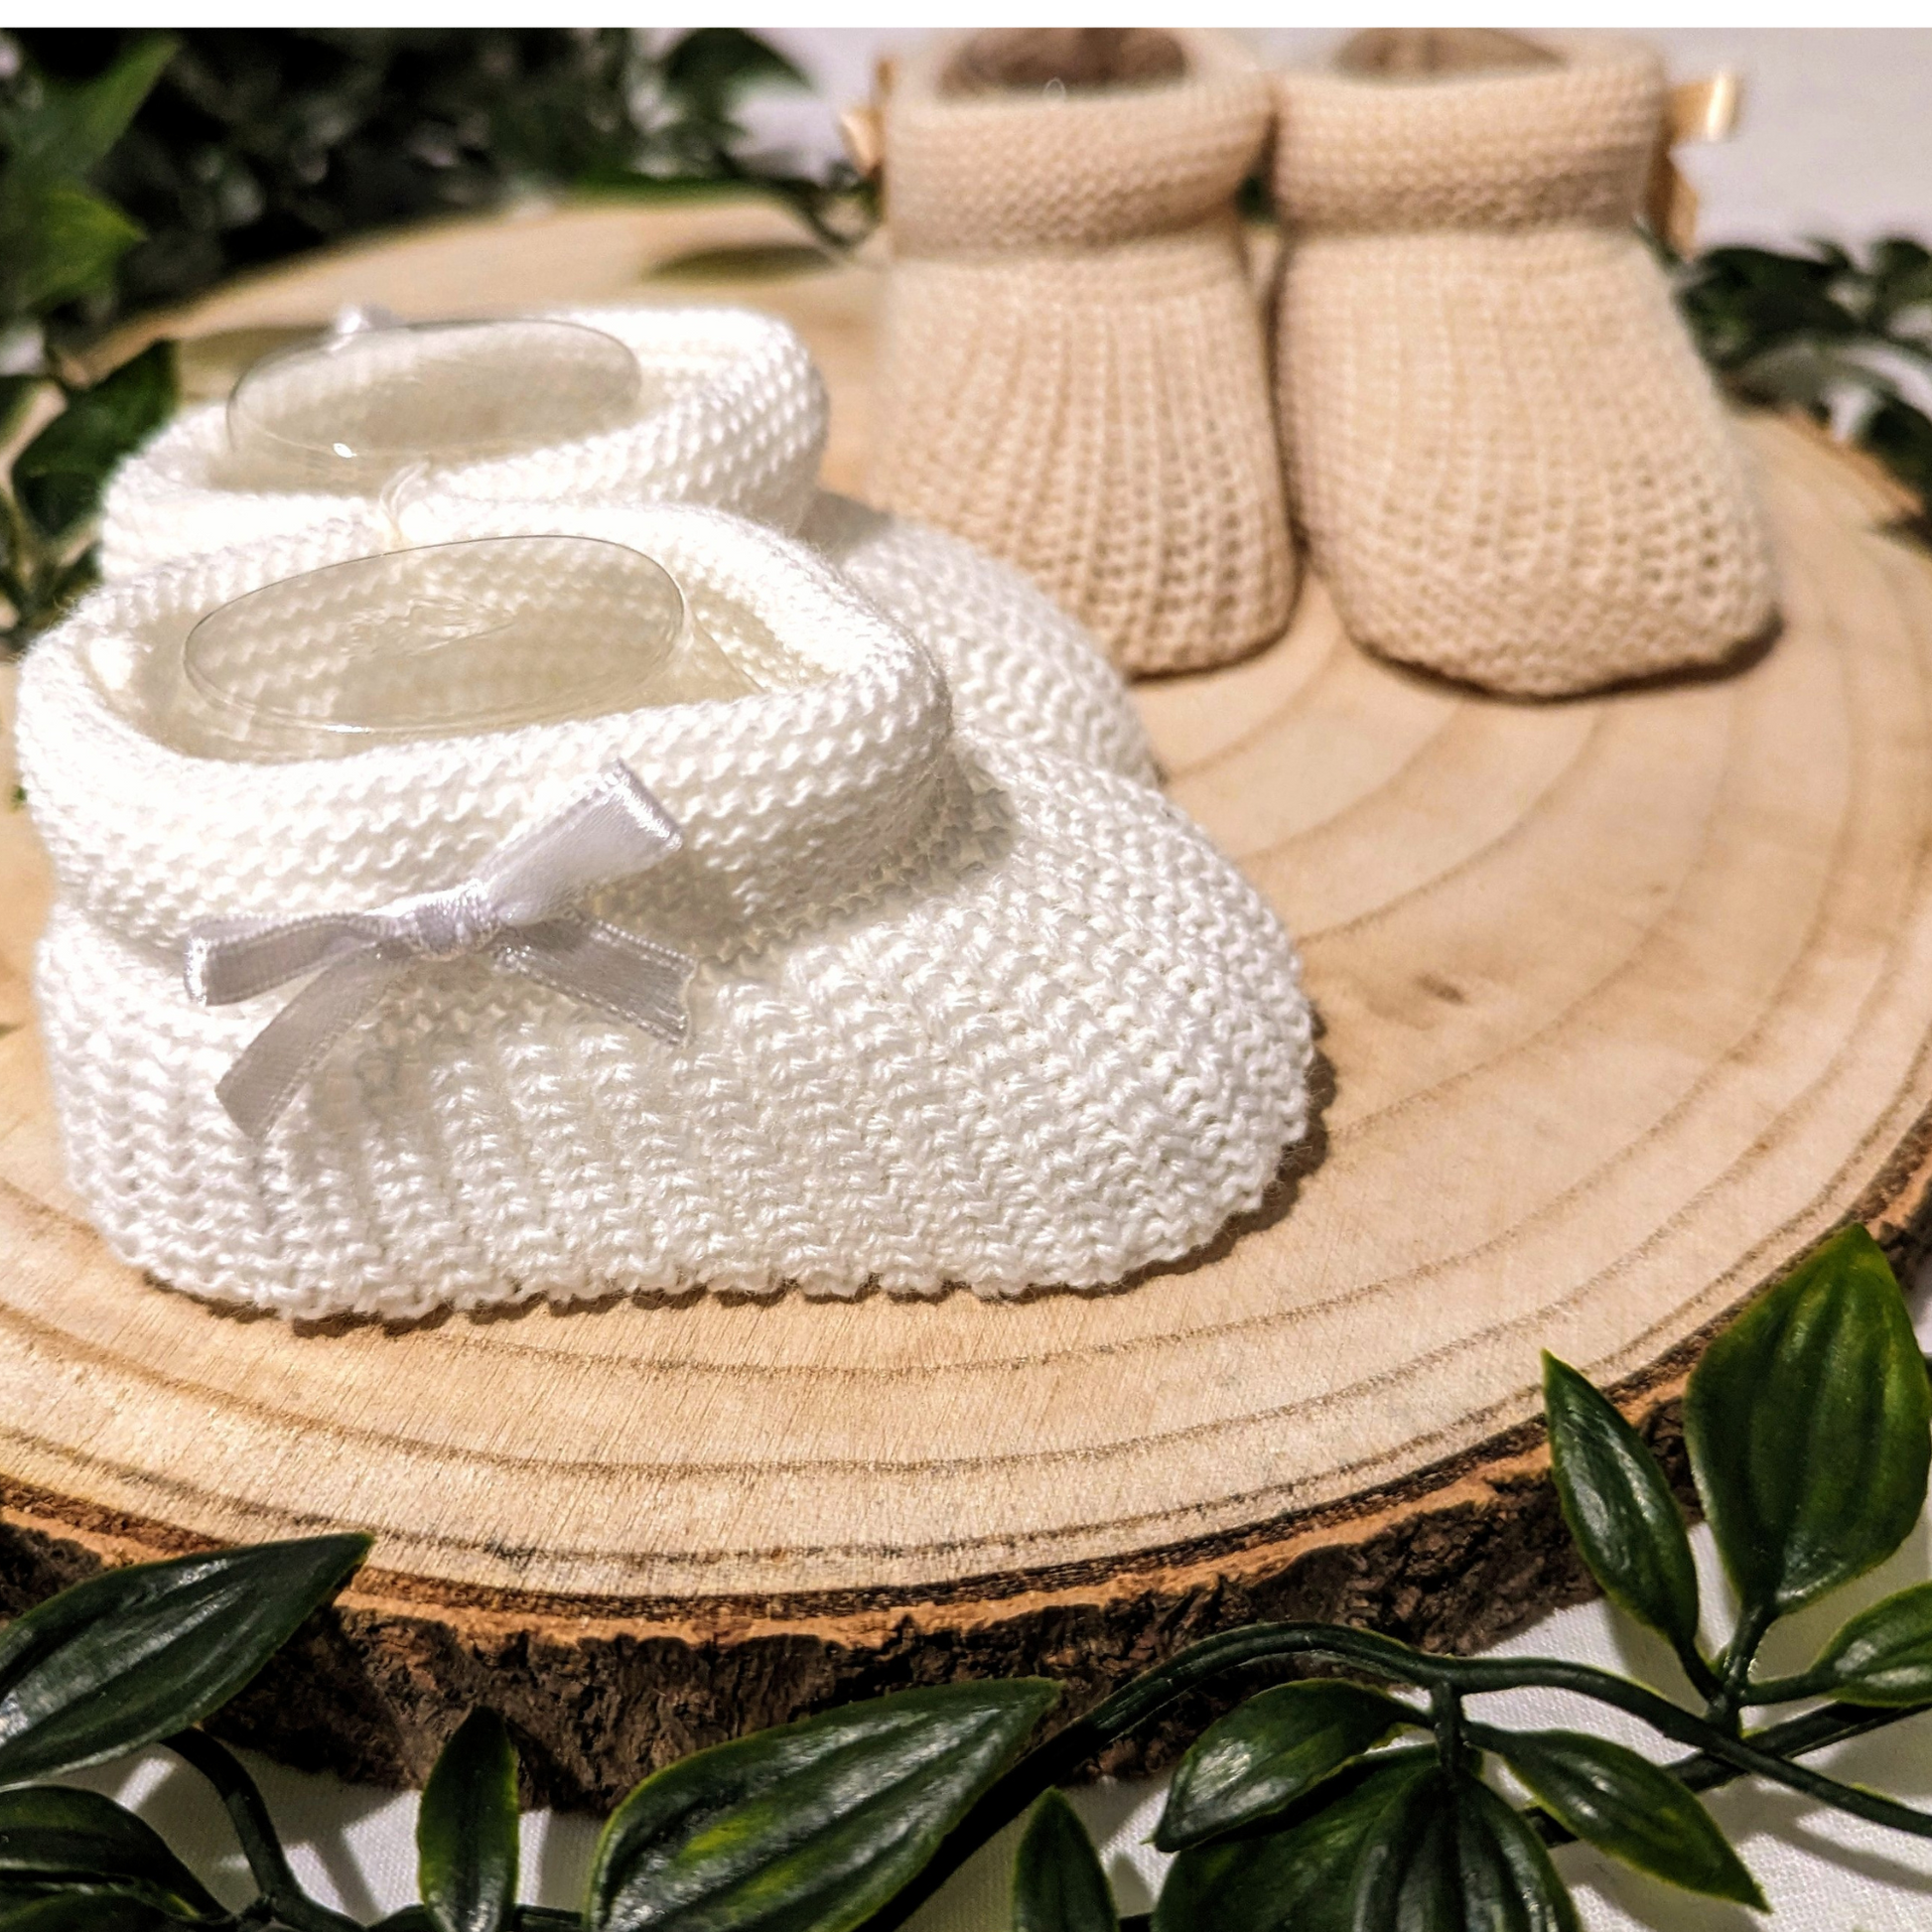 Unisex Newborn Clothes - Baby booties with a white coloured knitted design, featuring a small bow on the side. (Featured on a neutral background)